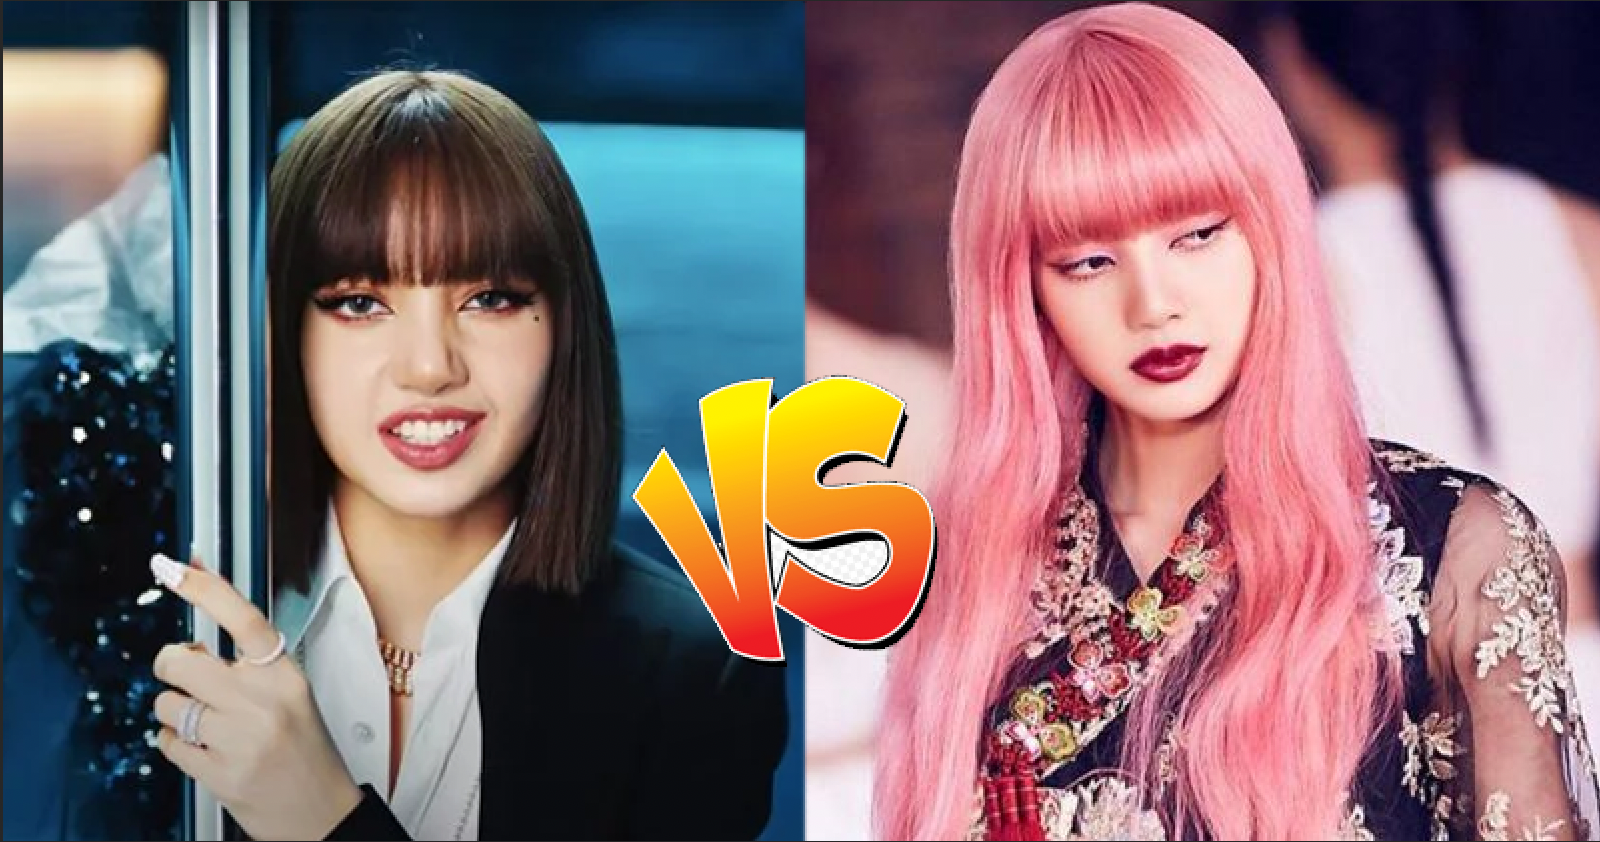 English VS Korean, Which Does BLACKPINK Lisa Choose Is Harder To Rap In?